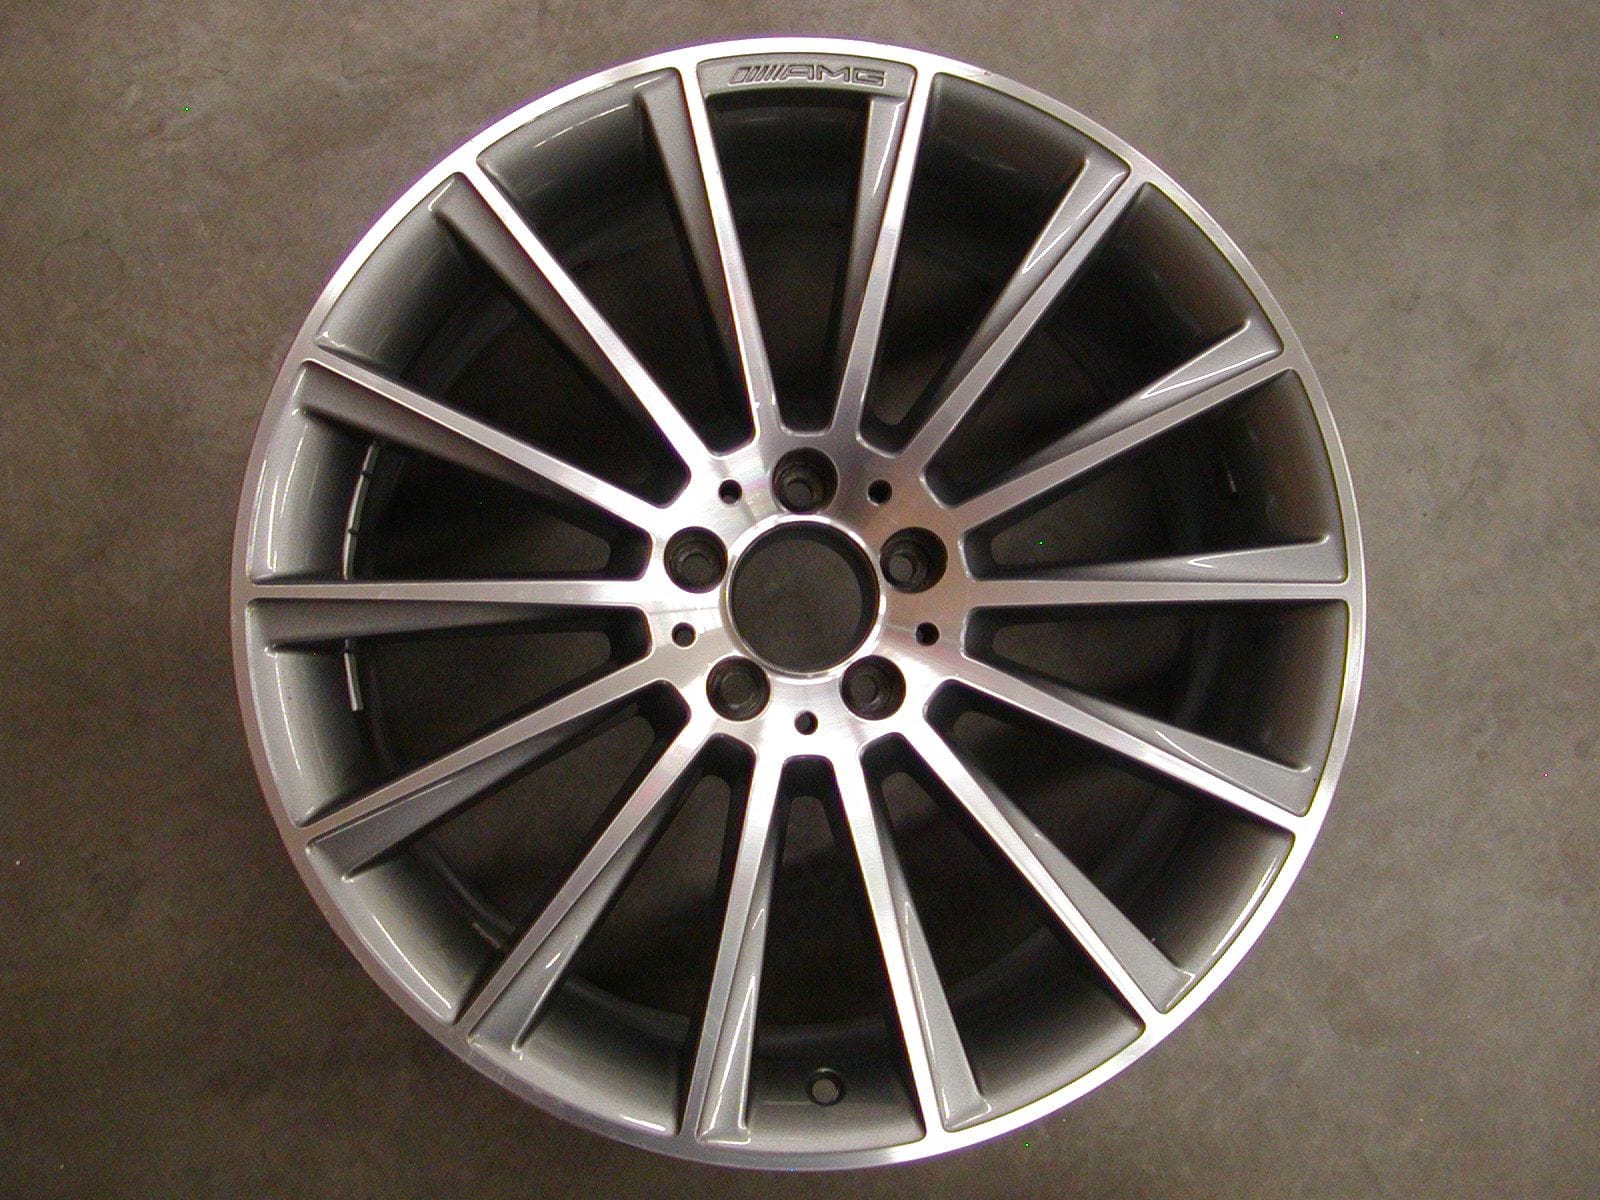 Wheels and Tires/Axles - Used Mercedes A2224010500 OEM AMG 20 x 9.5 WHEEL fits 2014 to 2019 S-Class - Used - 2014 to 2019 Mercedes-Benz S550 - Seattle, WA 98199, United States